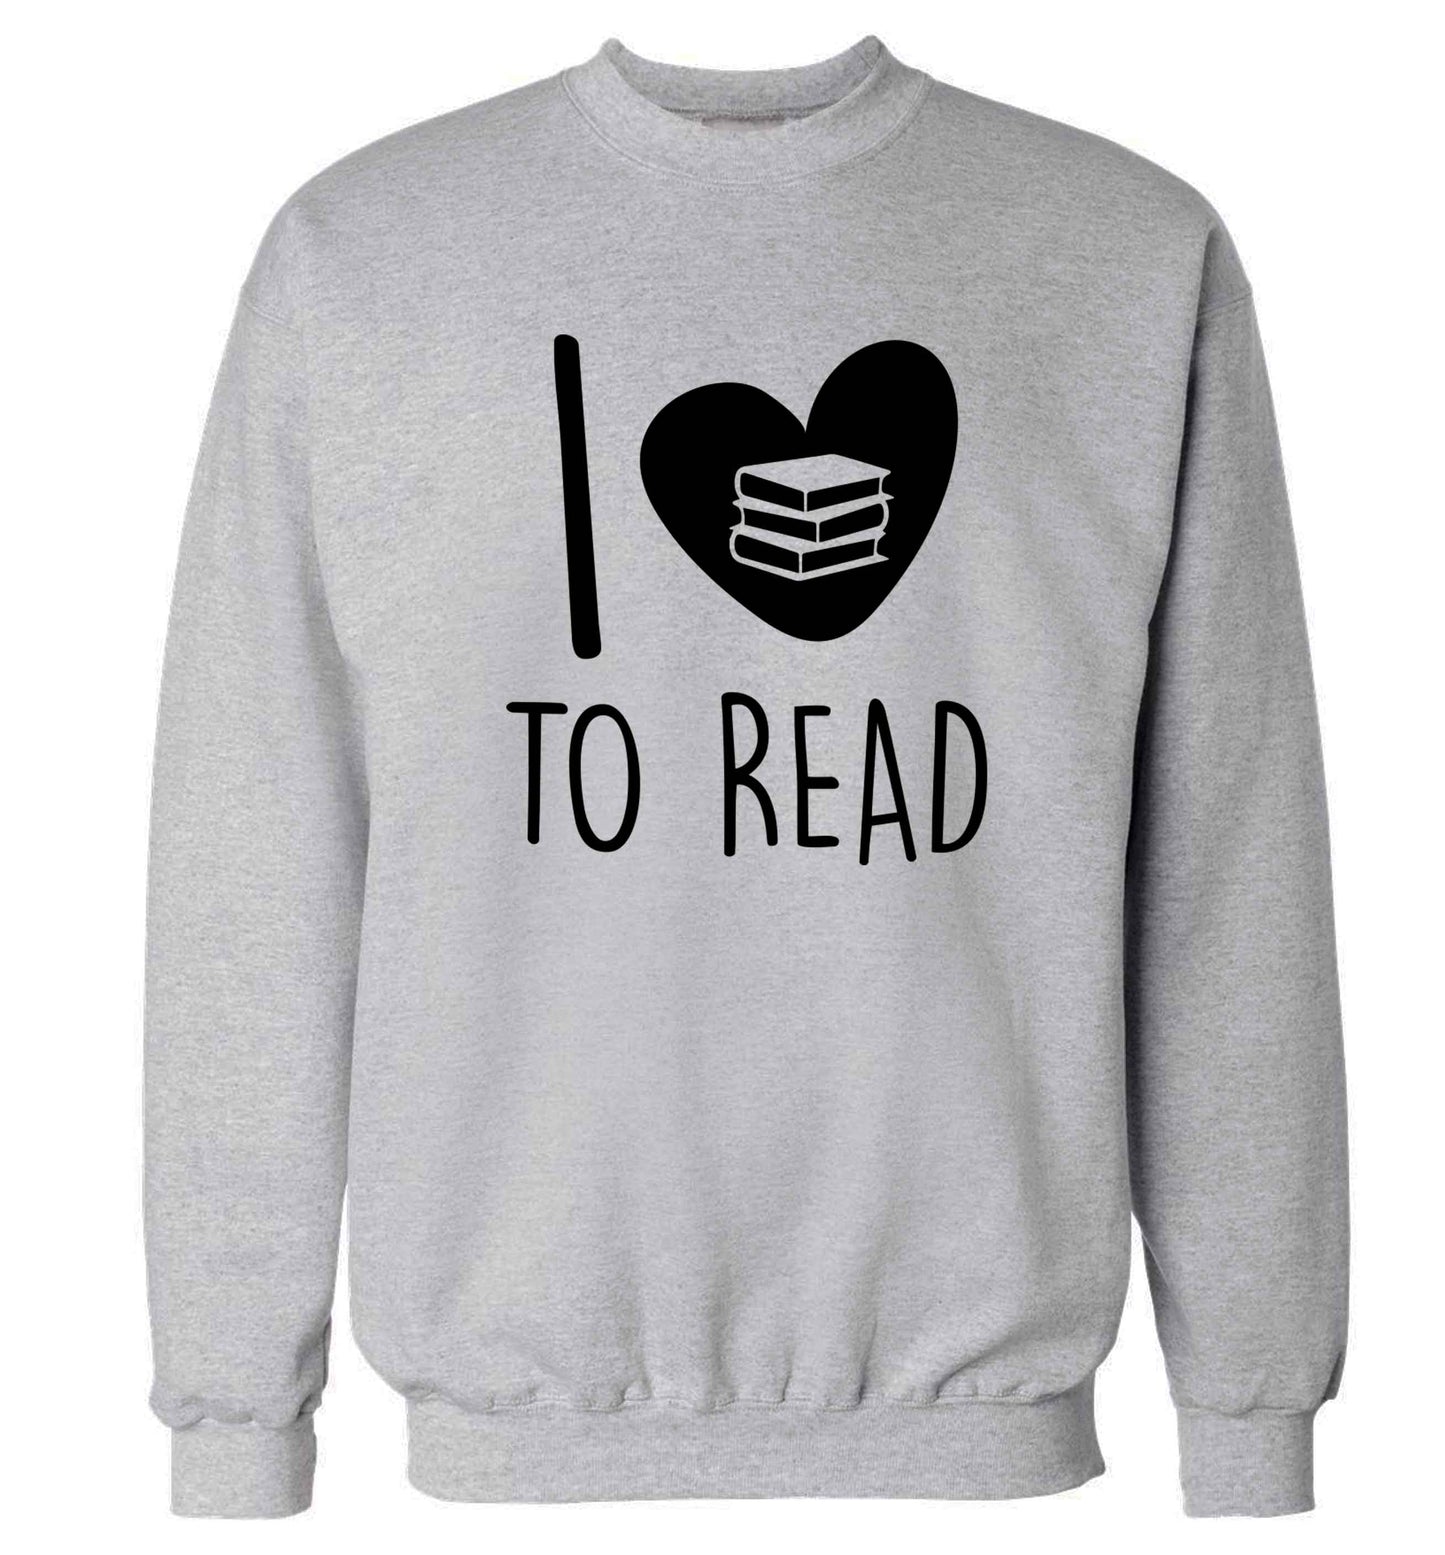 I love to read Adult's unisex grey Sweater 2XL